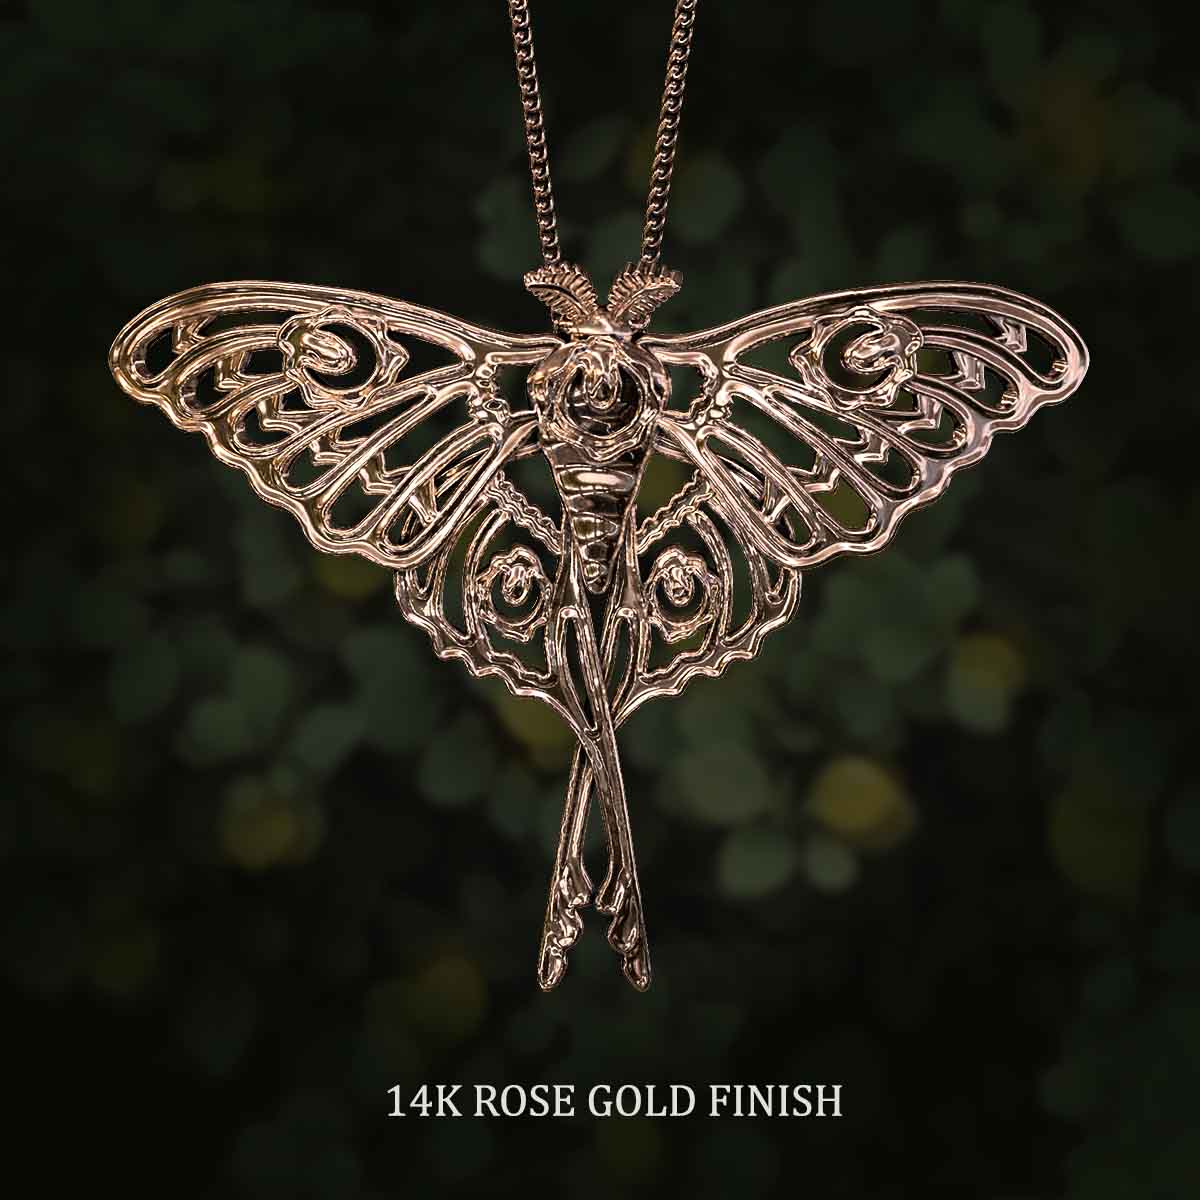 14K-Rose-Gold-Finish-Comet-Moth-Pendant-Jewelry-For-Necklace